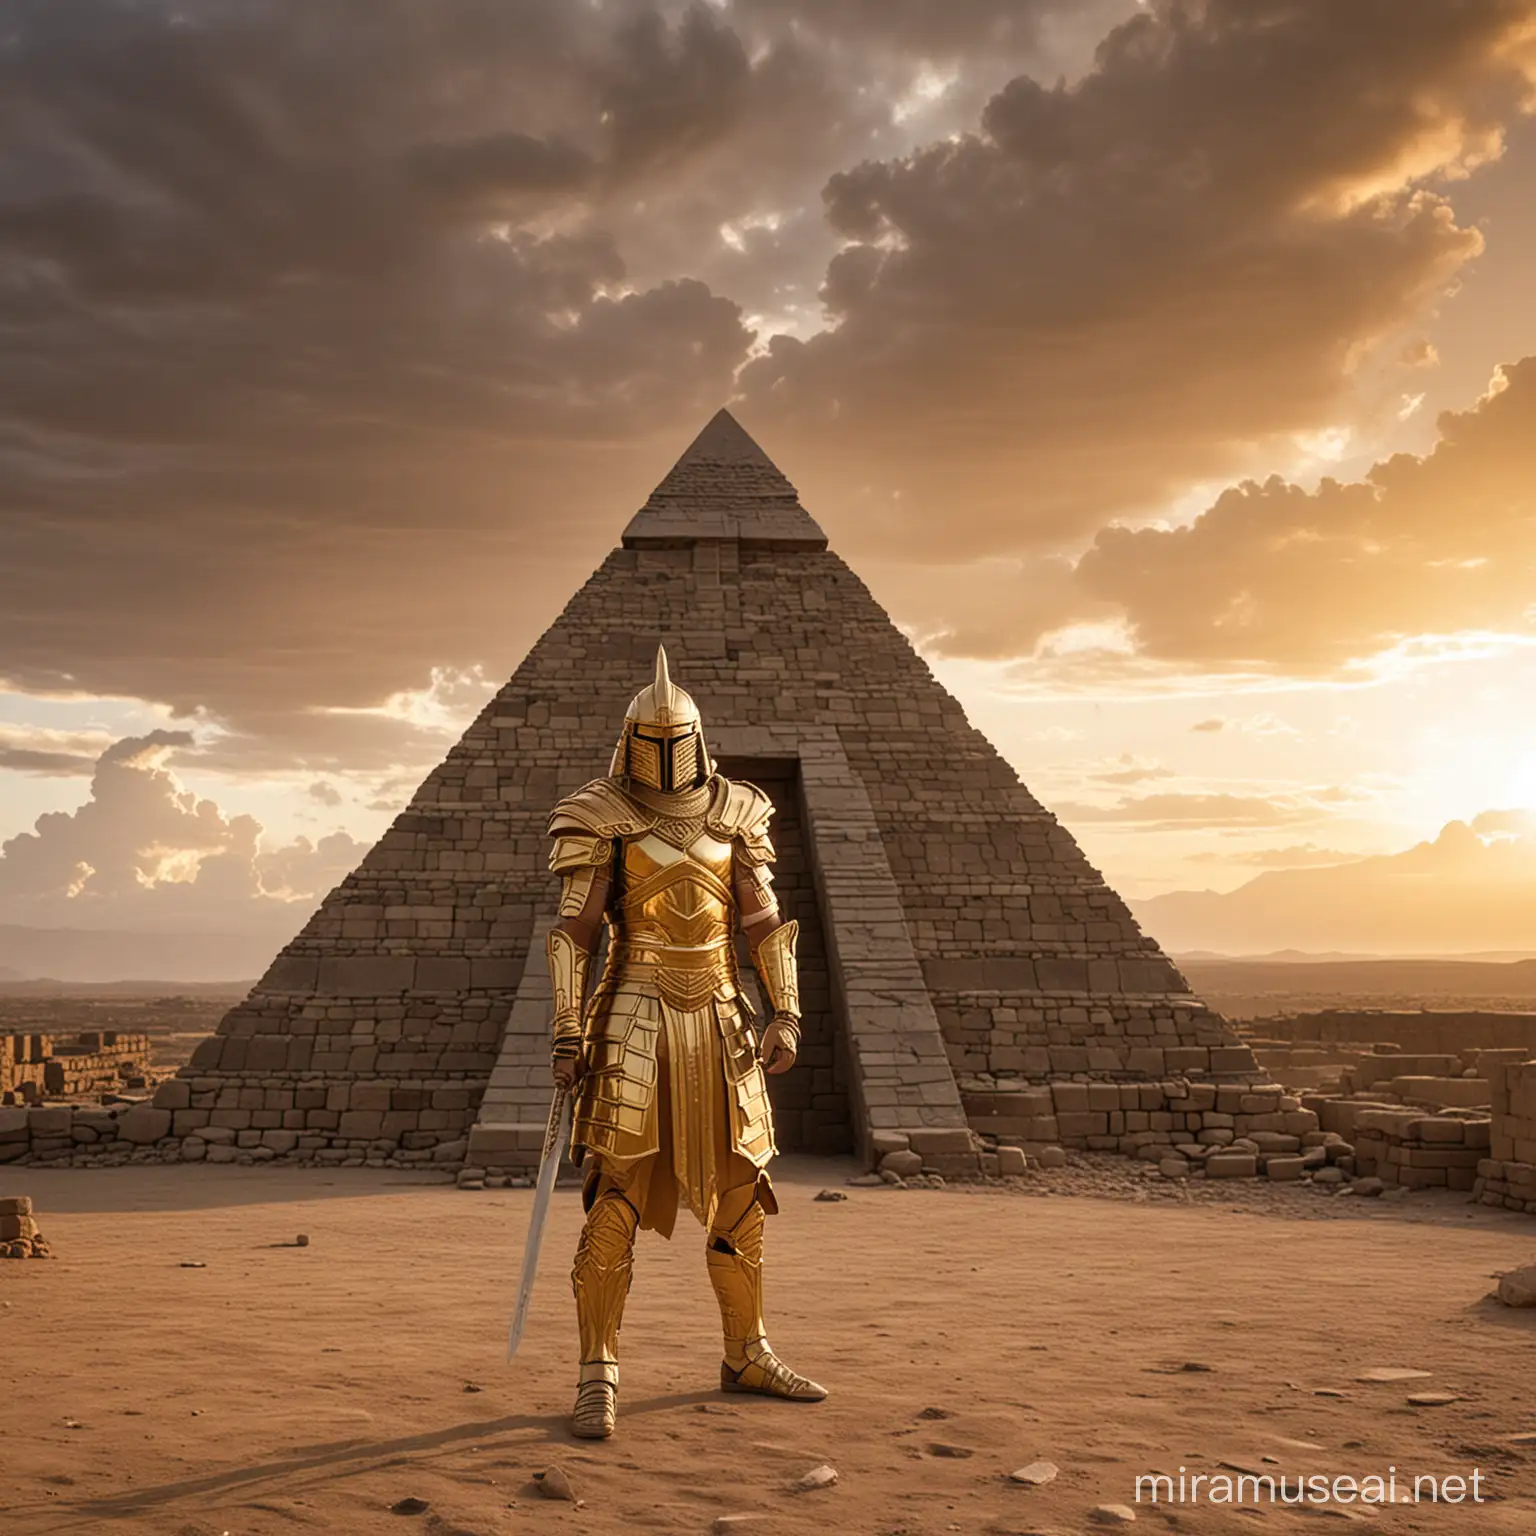 The image shows a person wearing a 
Gold garment and holding a sword. The person appears to be in some kind of Gold armor or protective clothing.The image depicts a stone building with a pyramid structure in an outdoor setting. The background includes a cloudy sky during either a sunset or sunrise. Additionally, there is a person in armor holding a sword in the image.